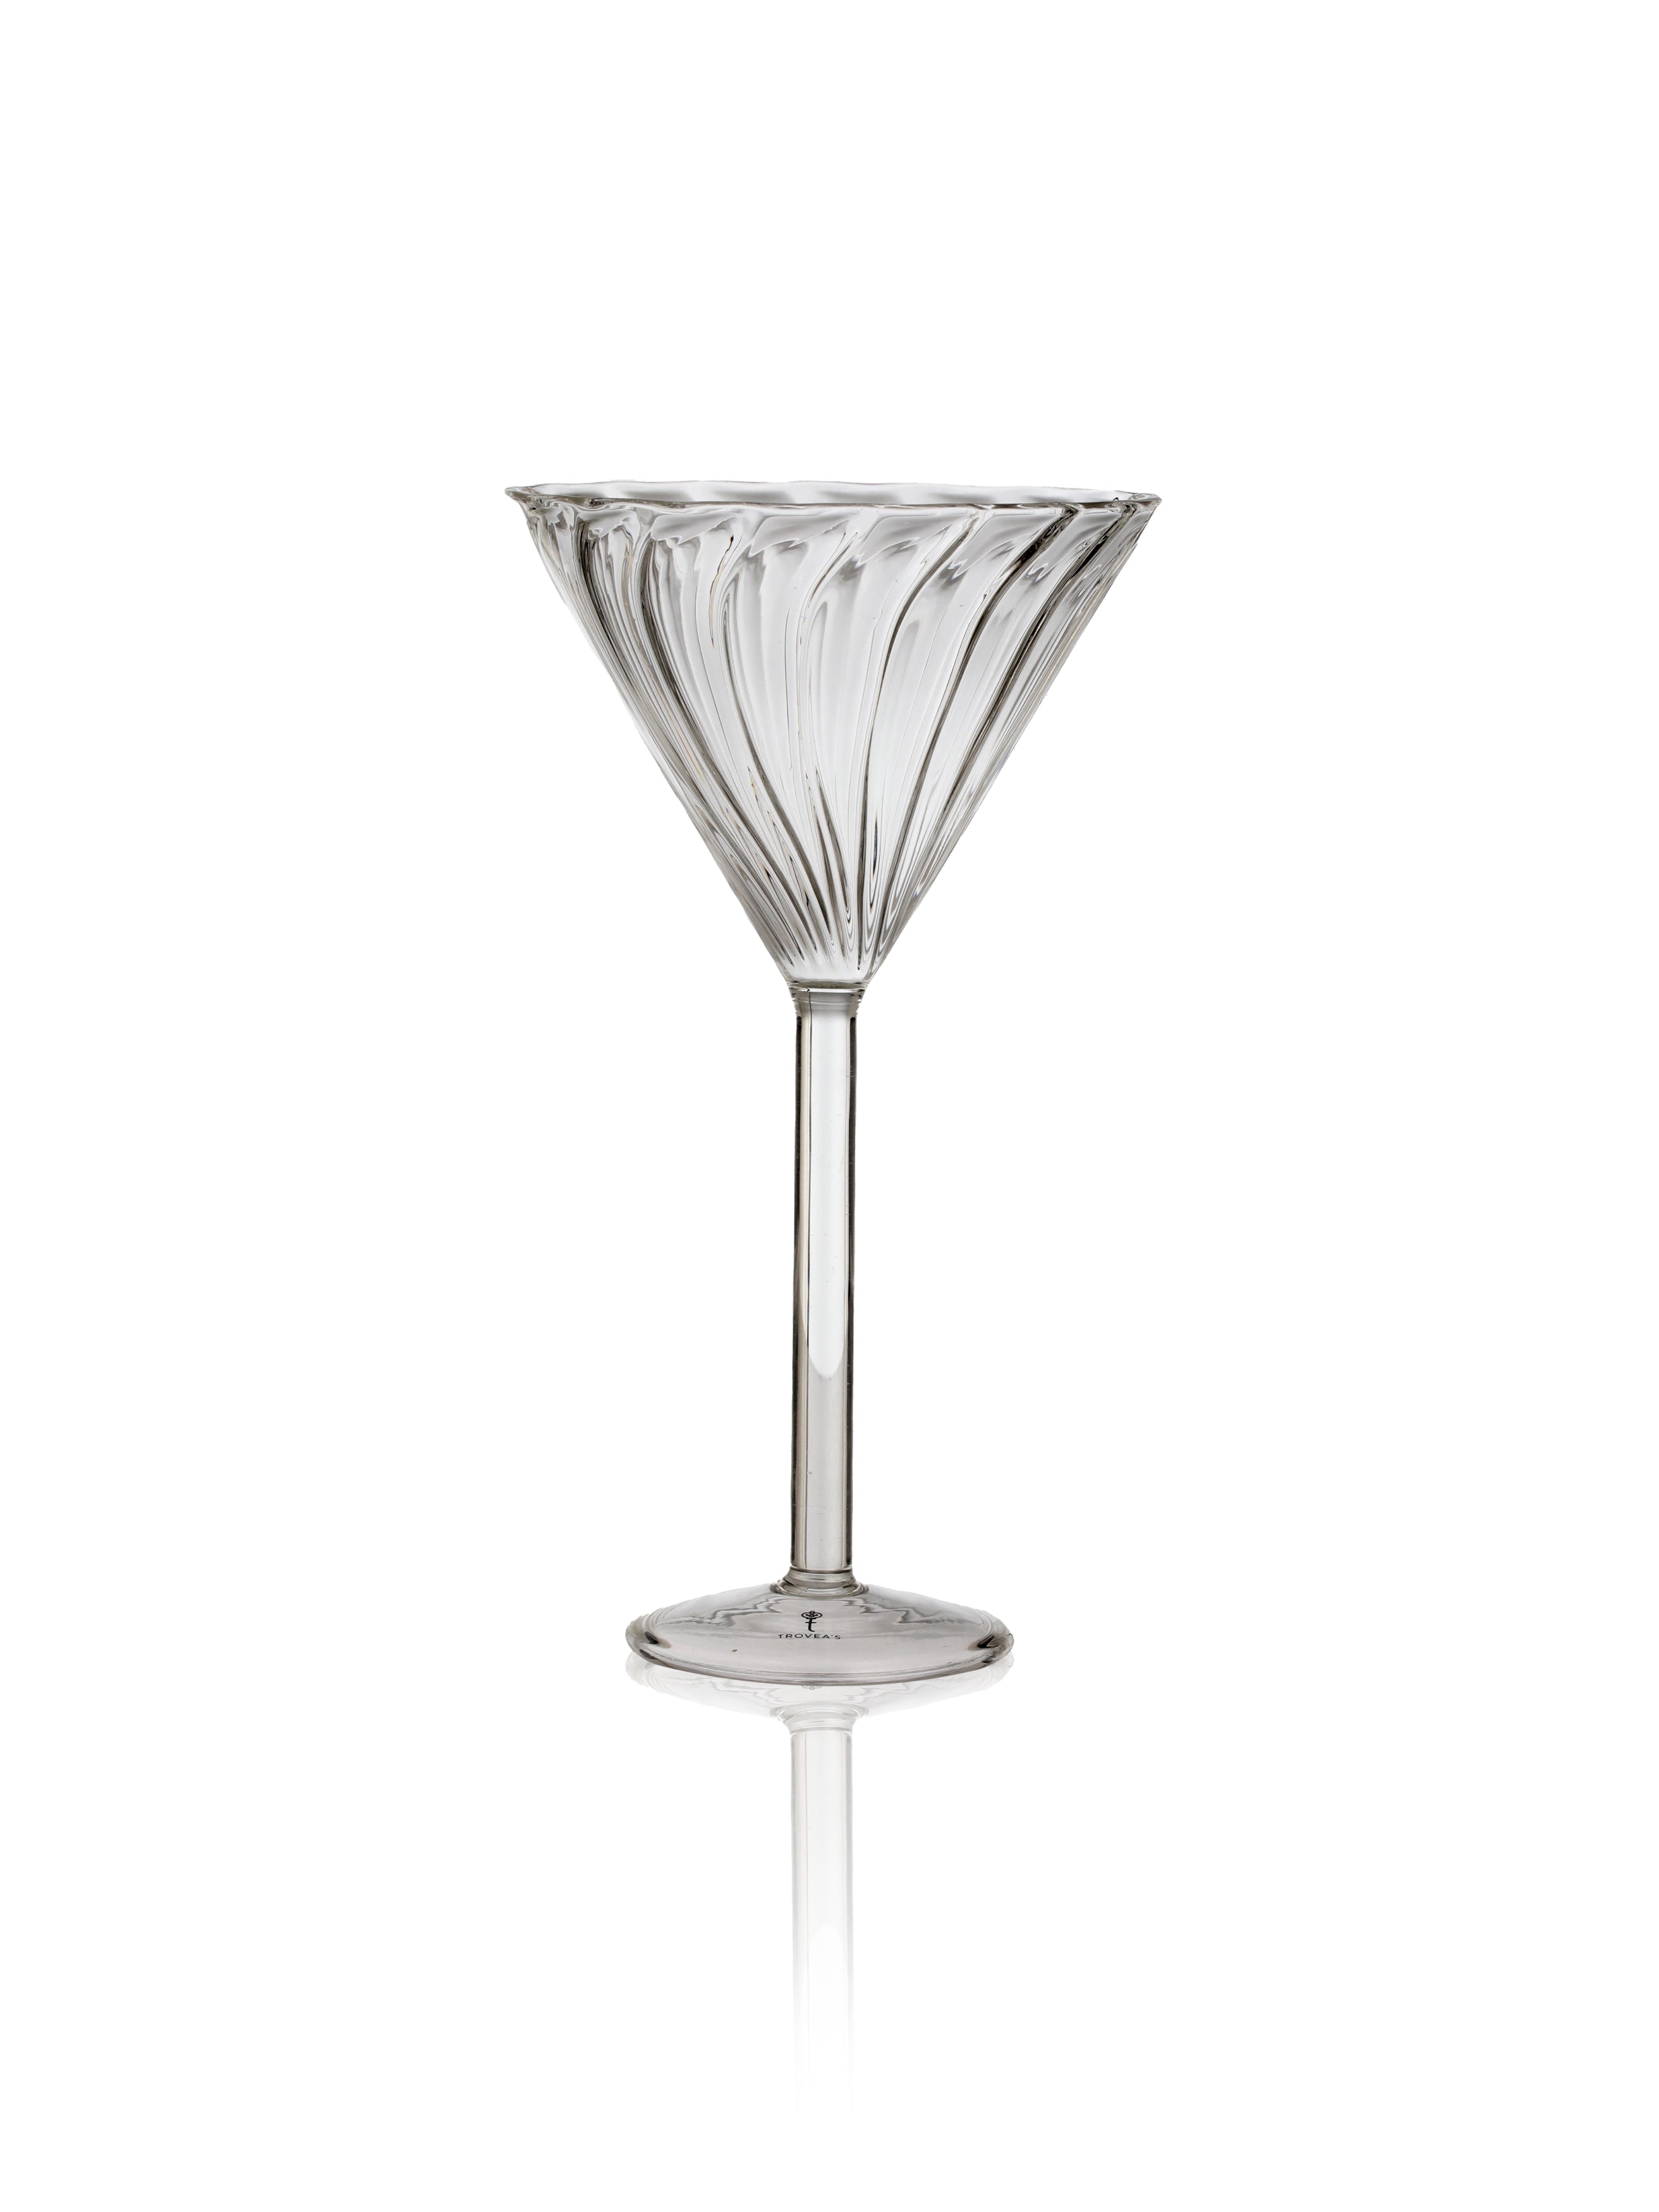 Classic Martini Glass for Stylish Sips, Set of 4